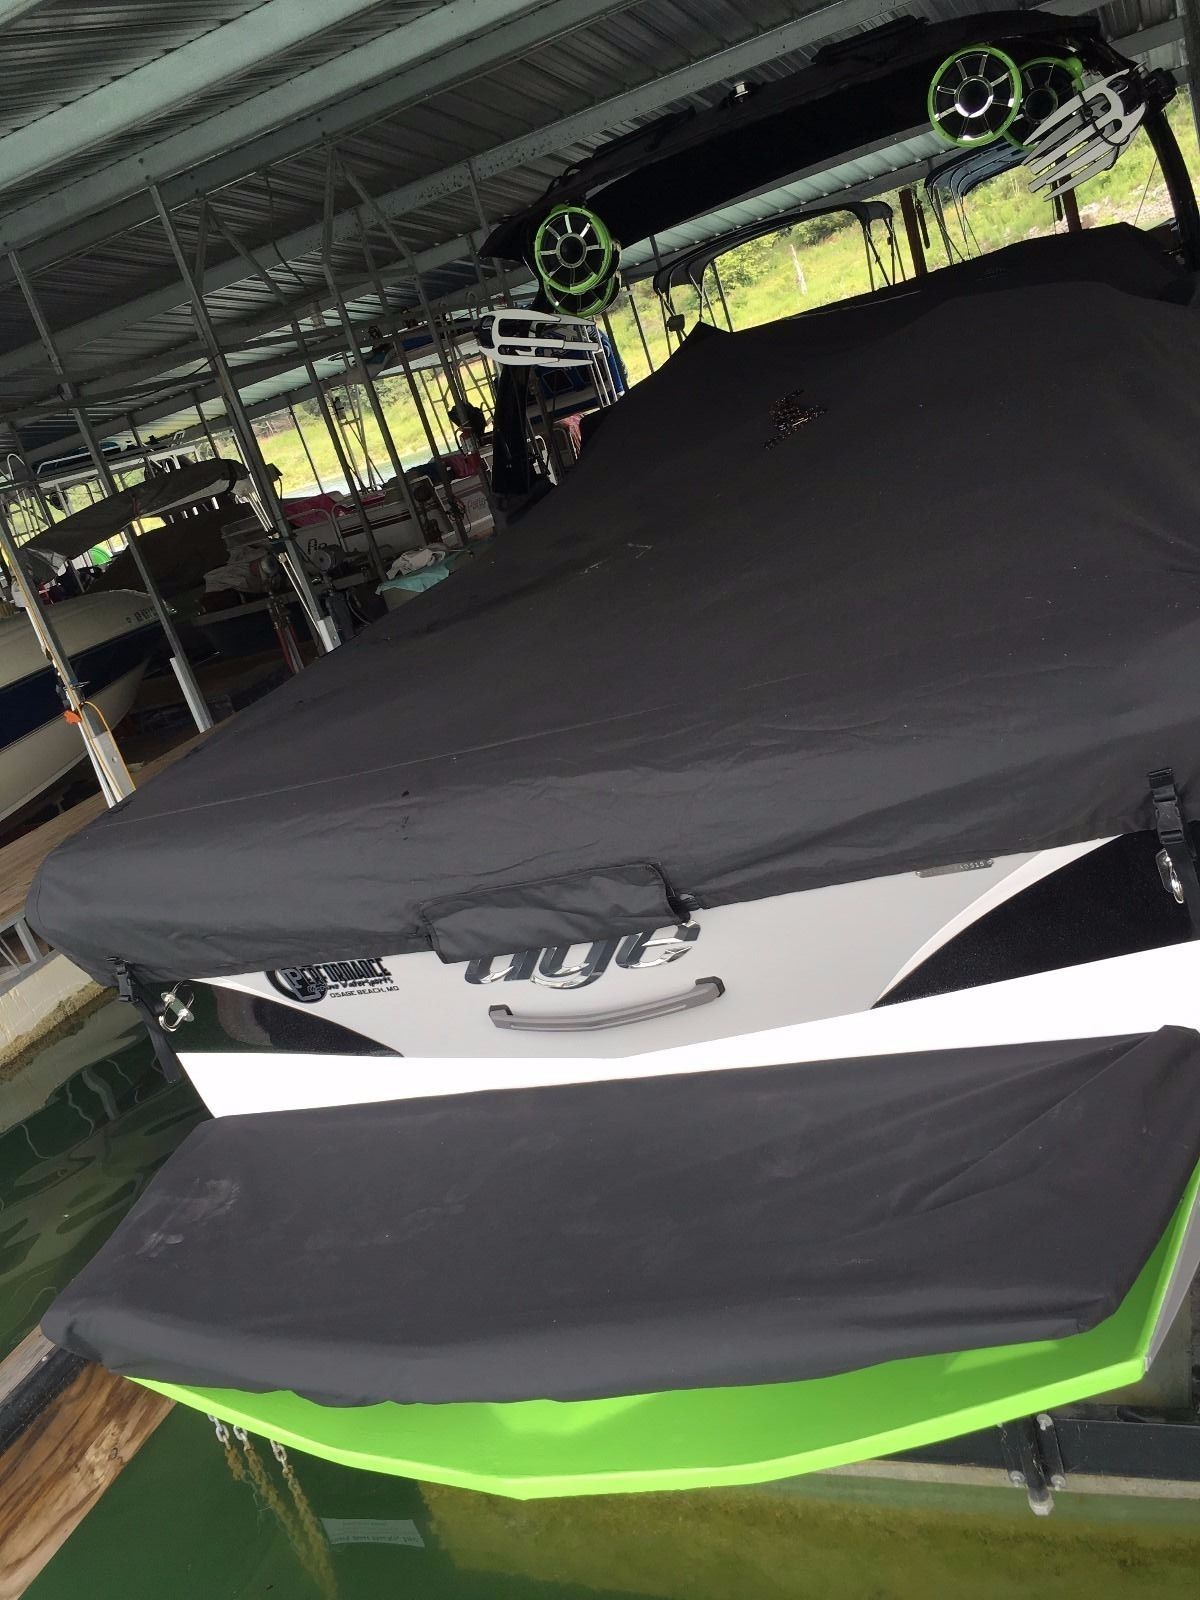 Tige Z3 2015 for sale for $10,400 - Boats-from-USA.com